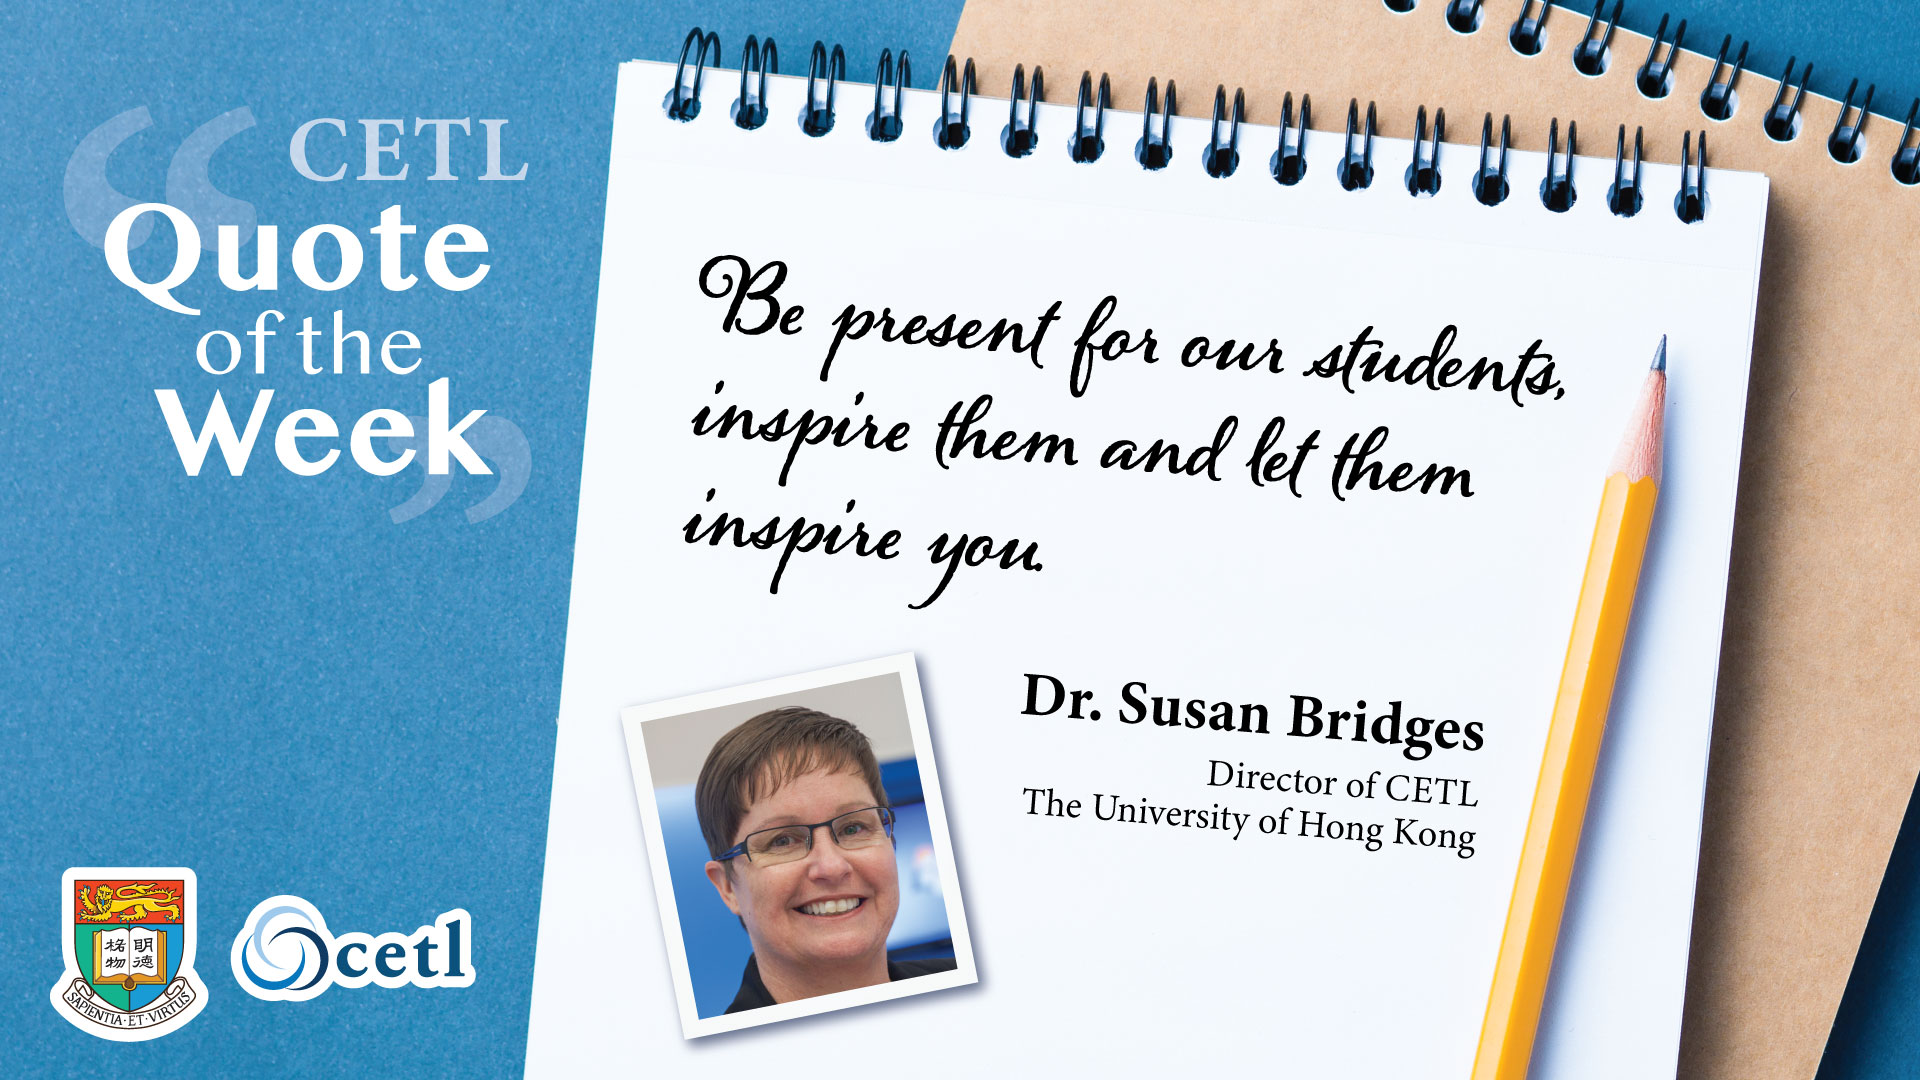 Dr. Susan Bridges - Be present for our students, inspire them and let them inspire you.​